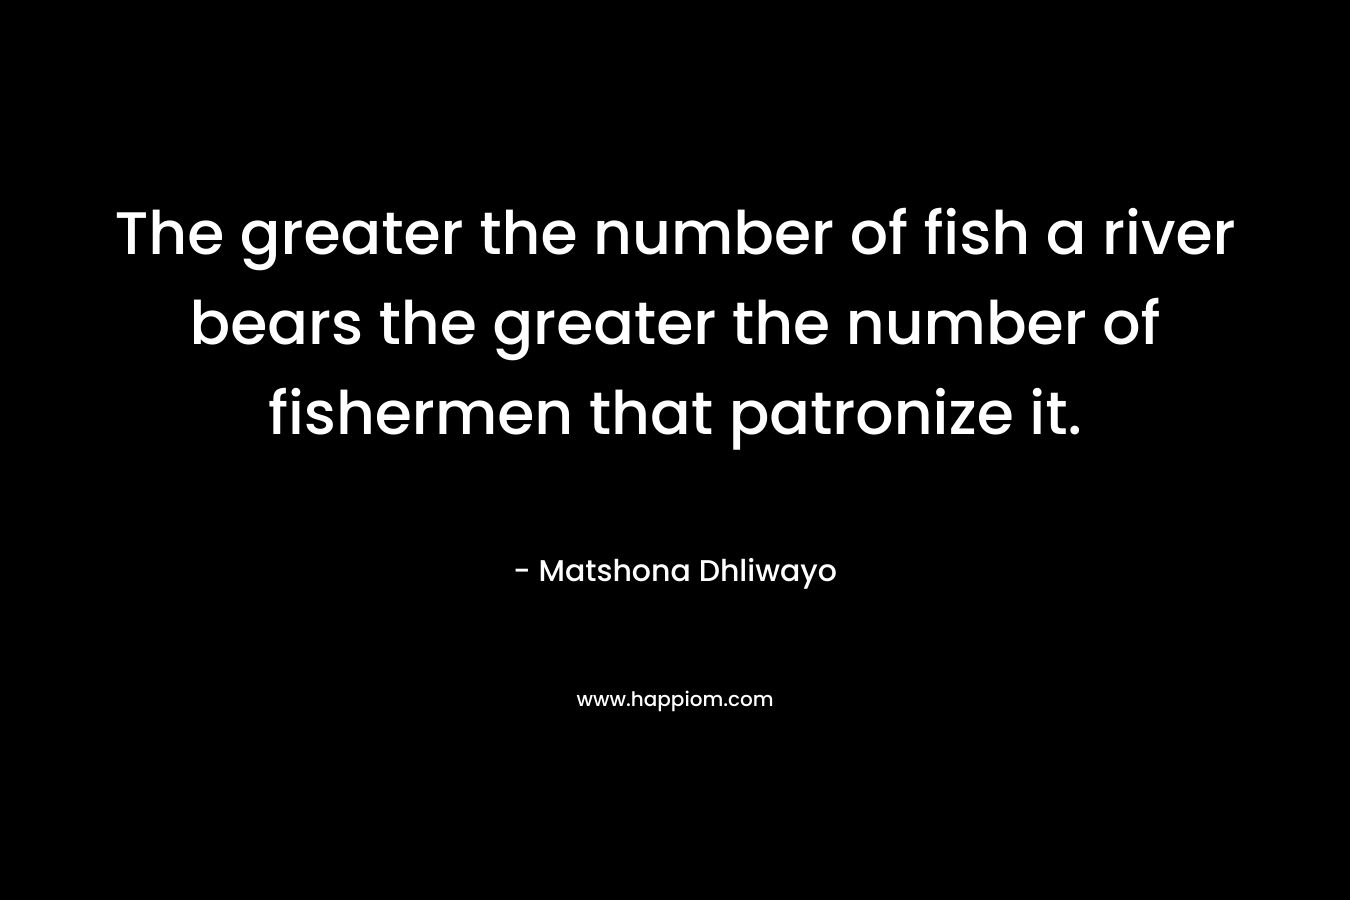 The greater the number of fish a river bears the greater the number of fishermen that patronize it.